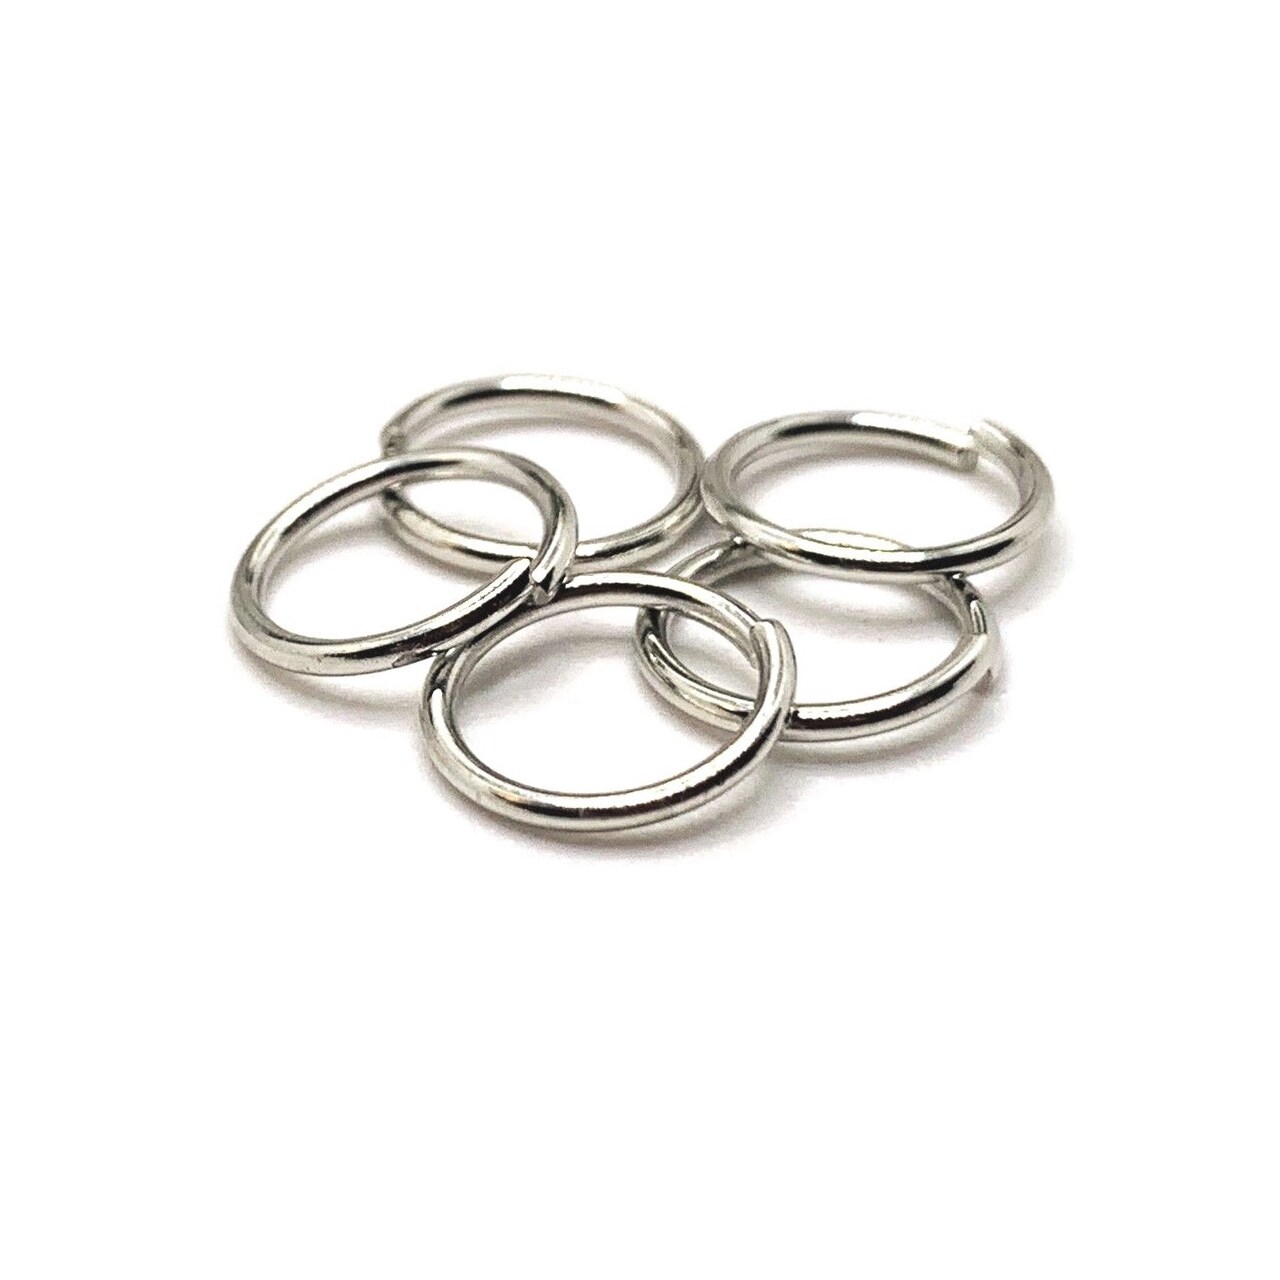 100, 500 or 1,000 Pieces: 10 mm Antique Silver Open Jump Rings, 18g